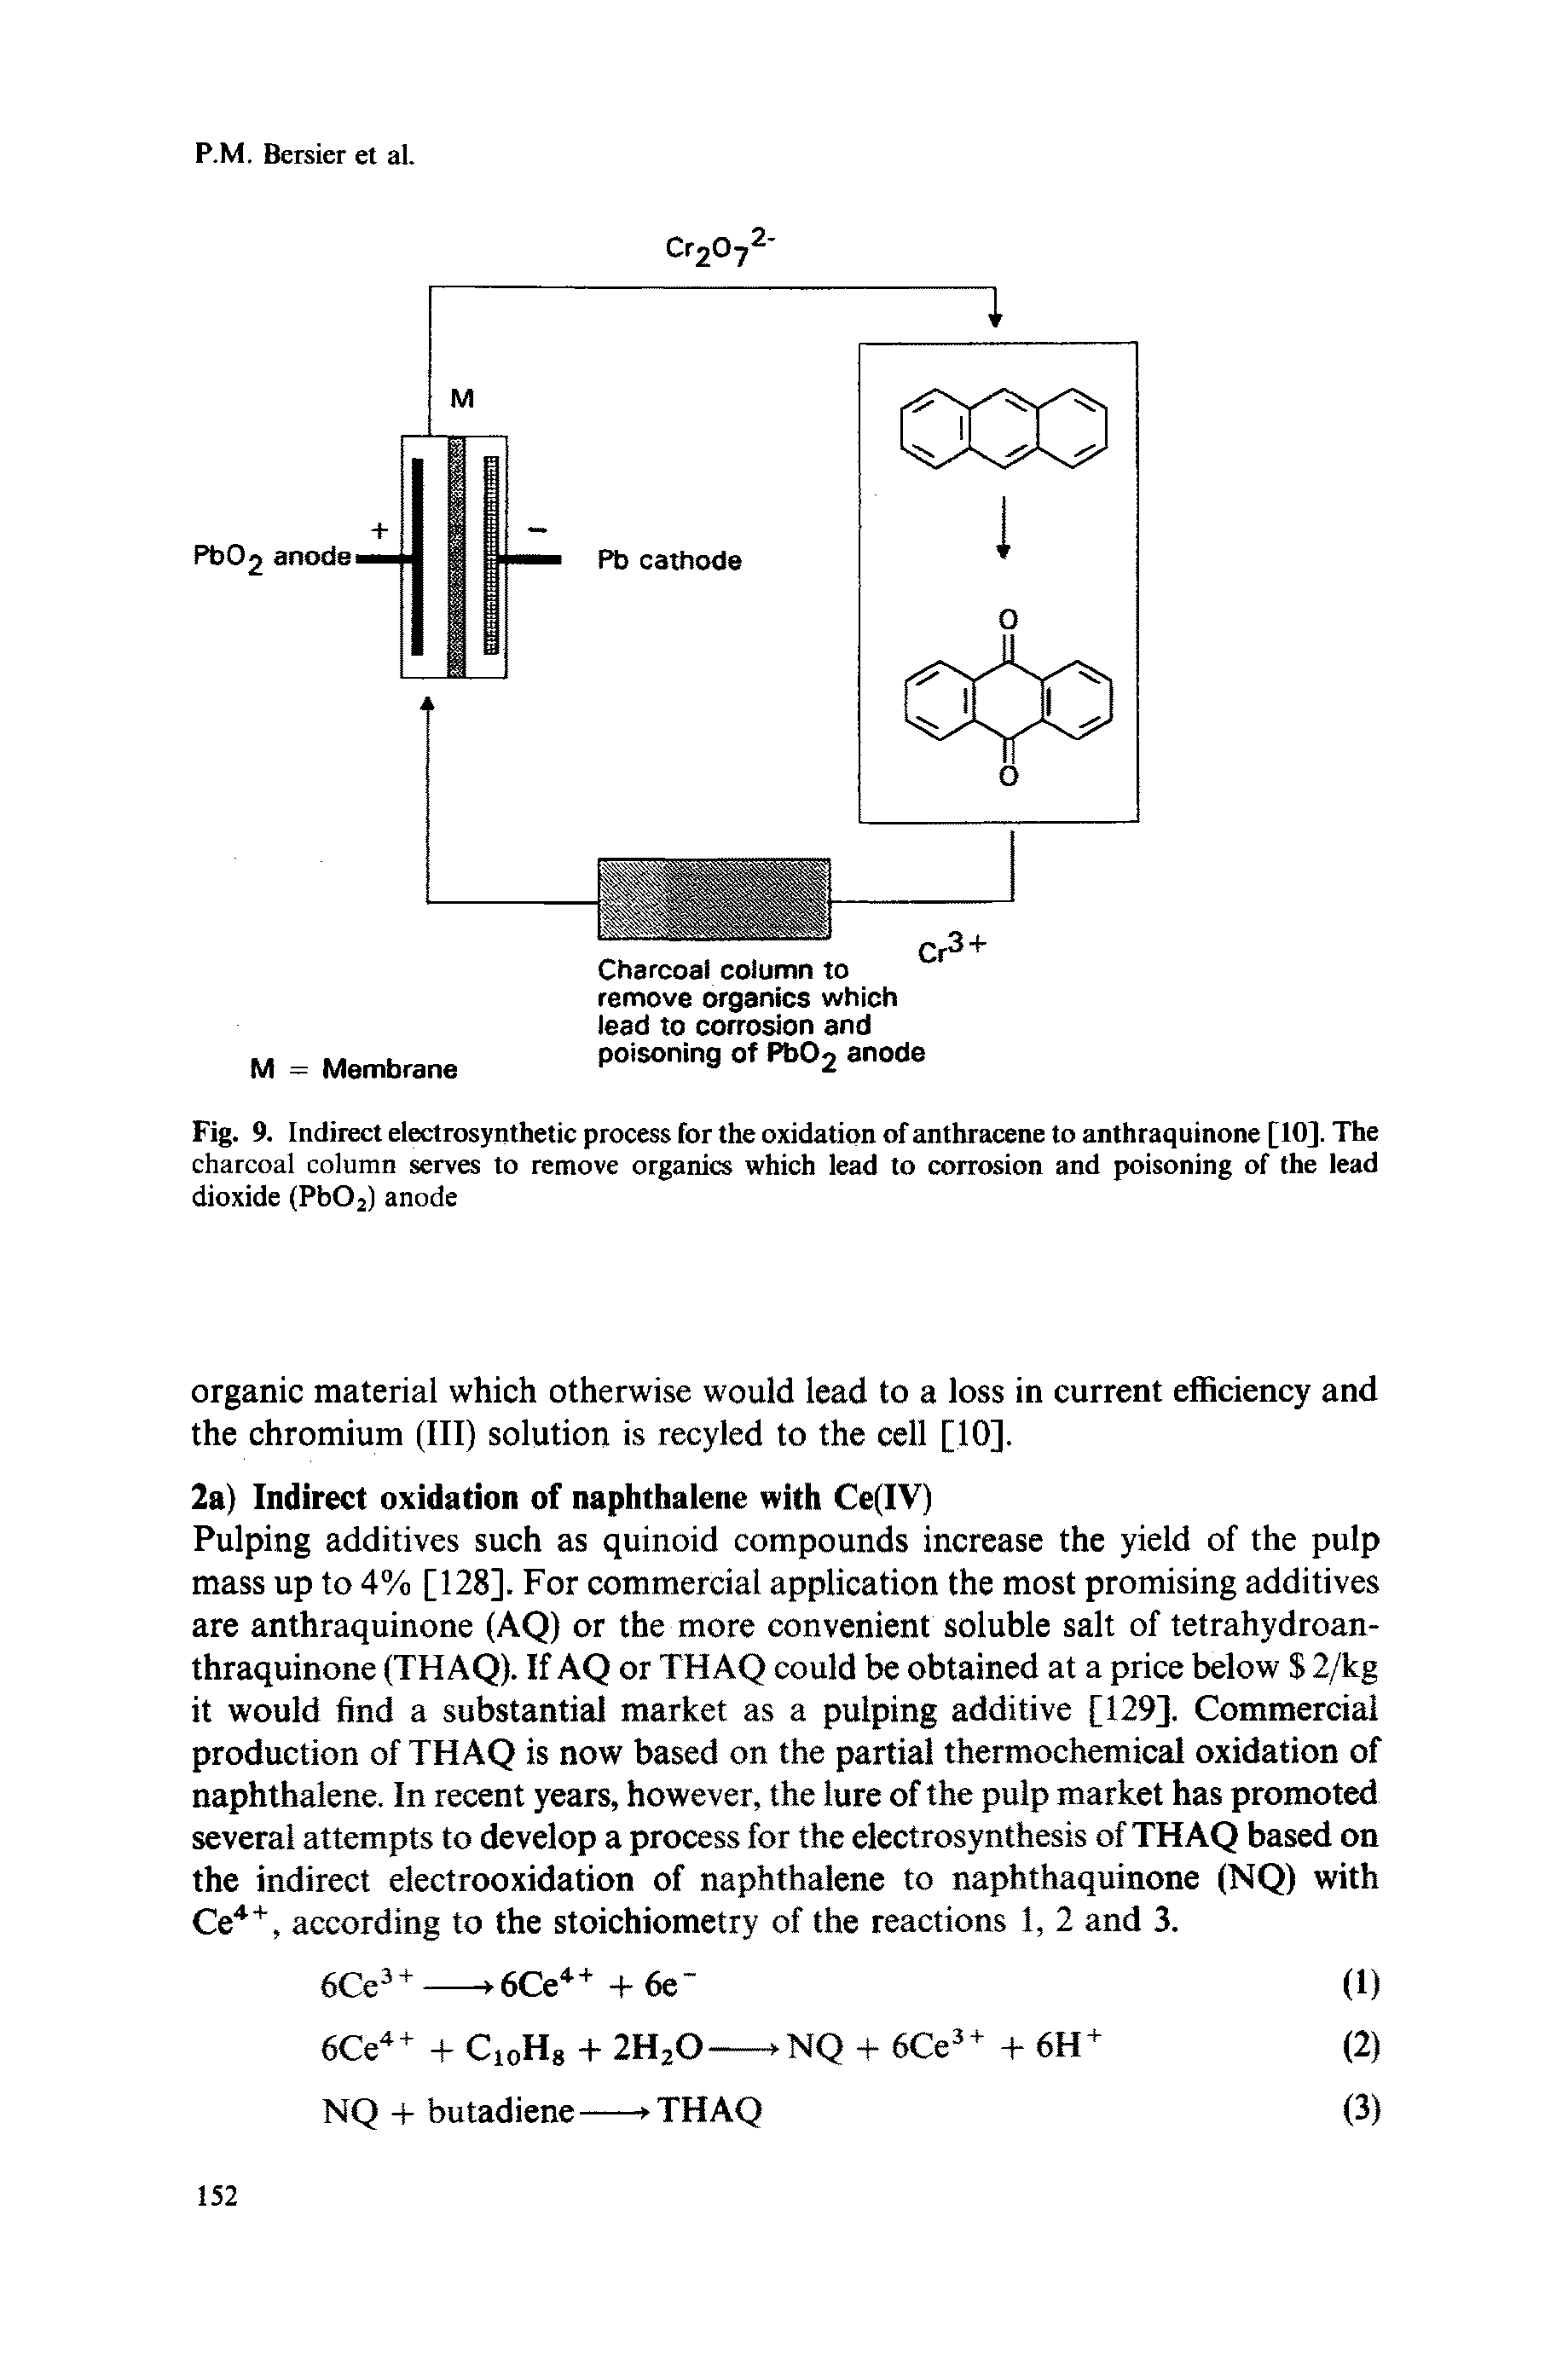 Fig. 9. Indirect electrosynthetic process for the oxidation of anthracene to anthraquinone [10]. The charcoal column serves to remove organics which lead to corrosion and poisoning of the lead dioxide (Pb02) anode...